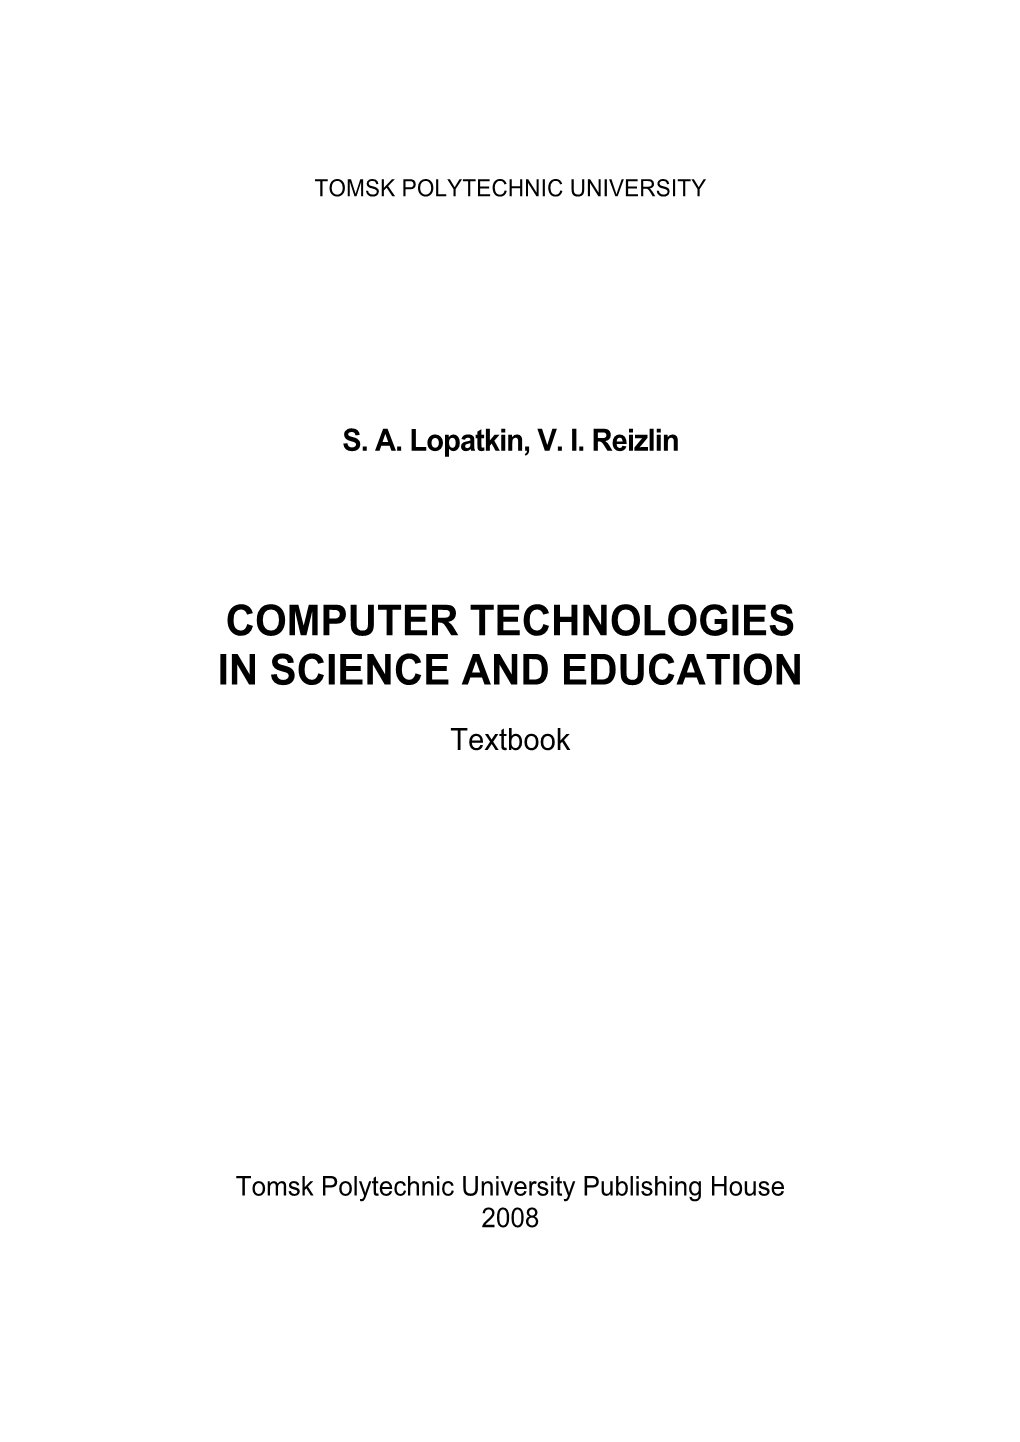 Computer Technologies in Science and Education